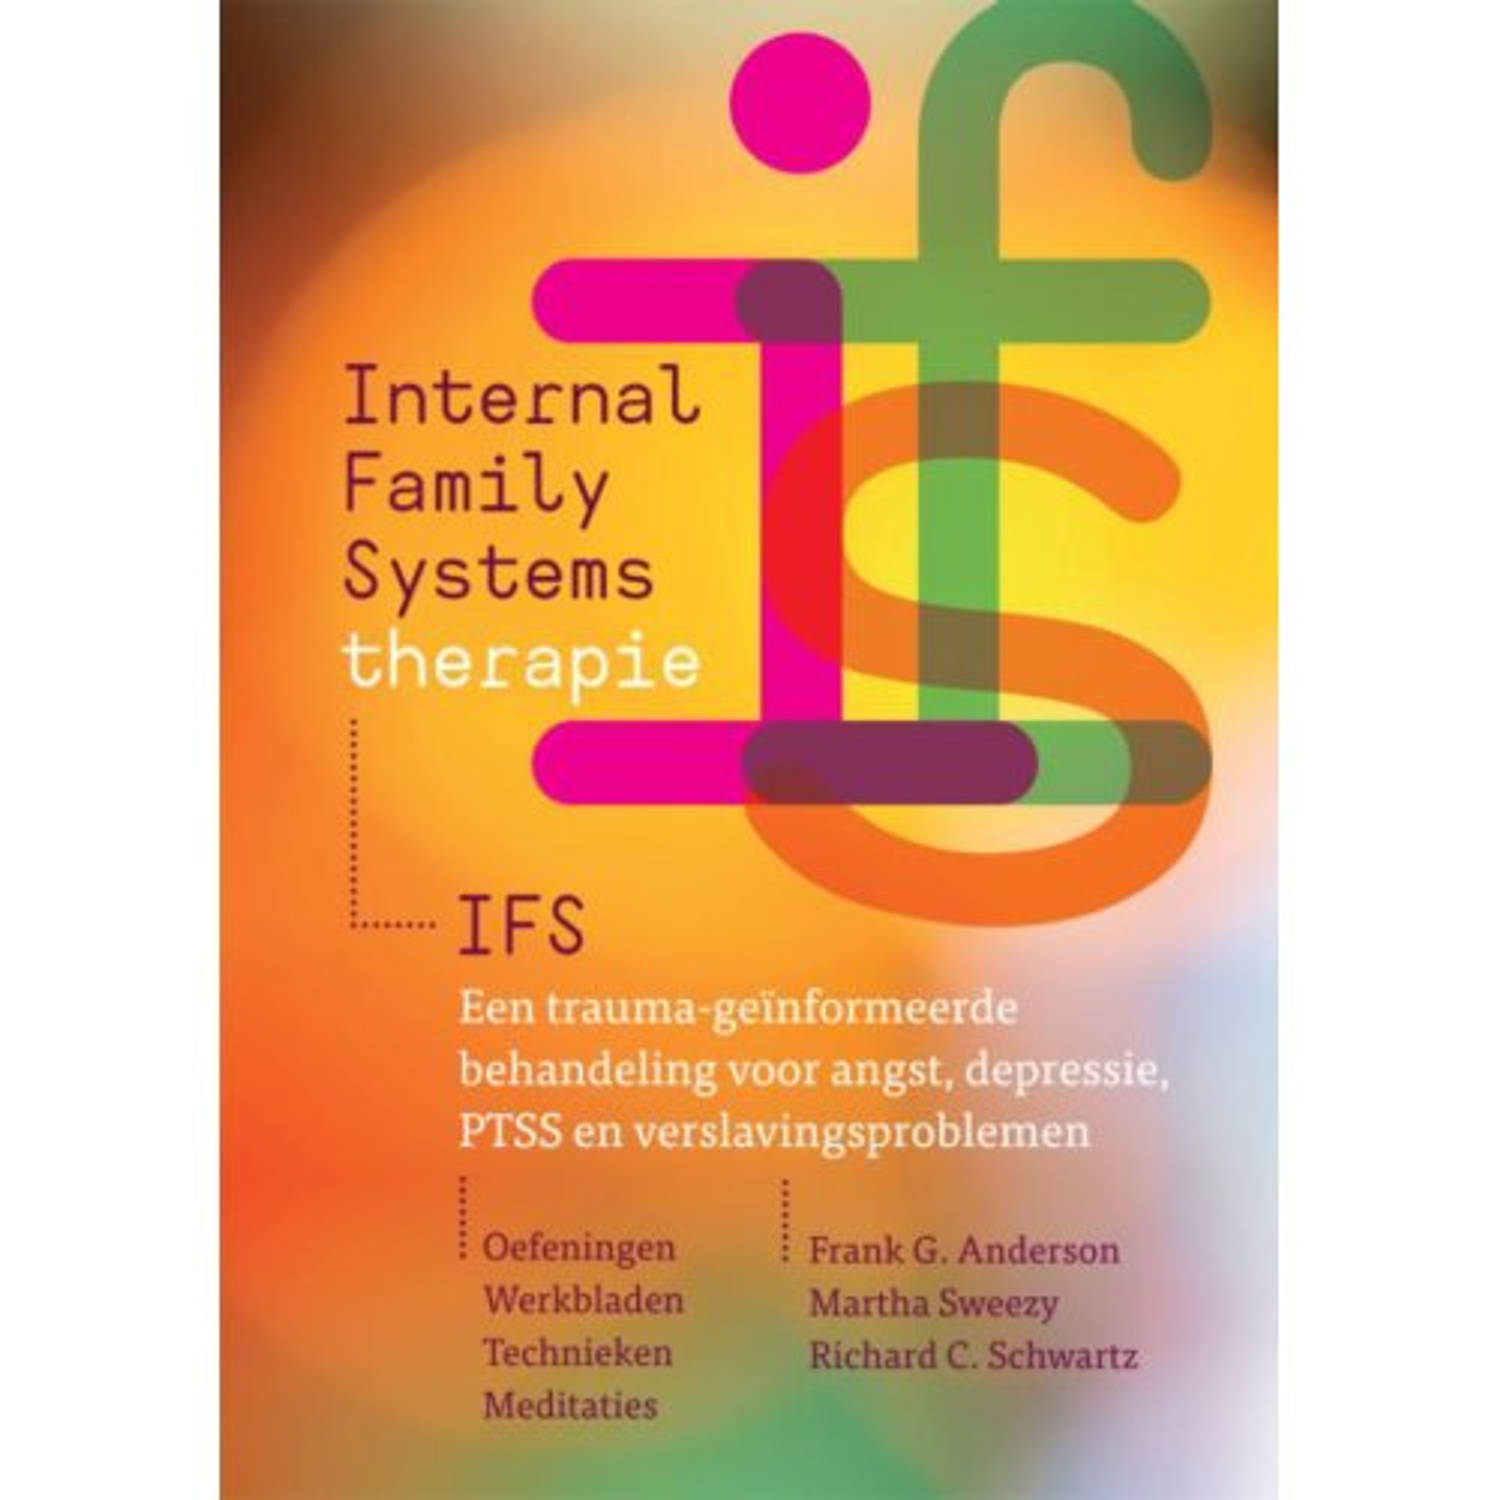 Internal Family Systems-therapie (Ifs)